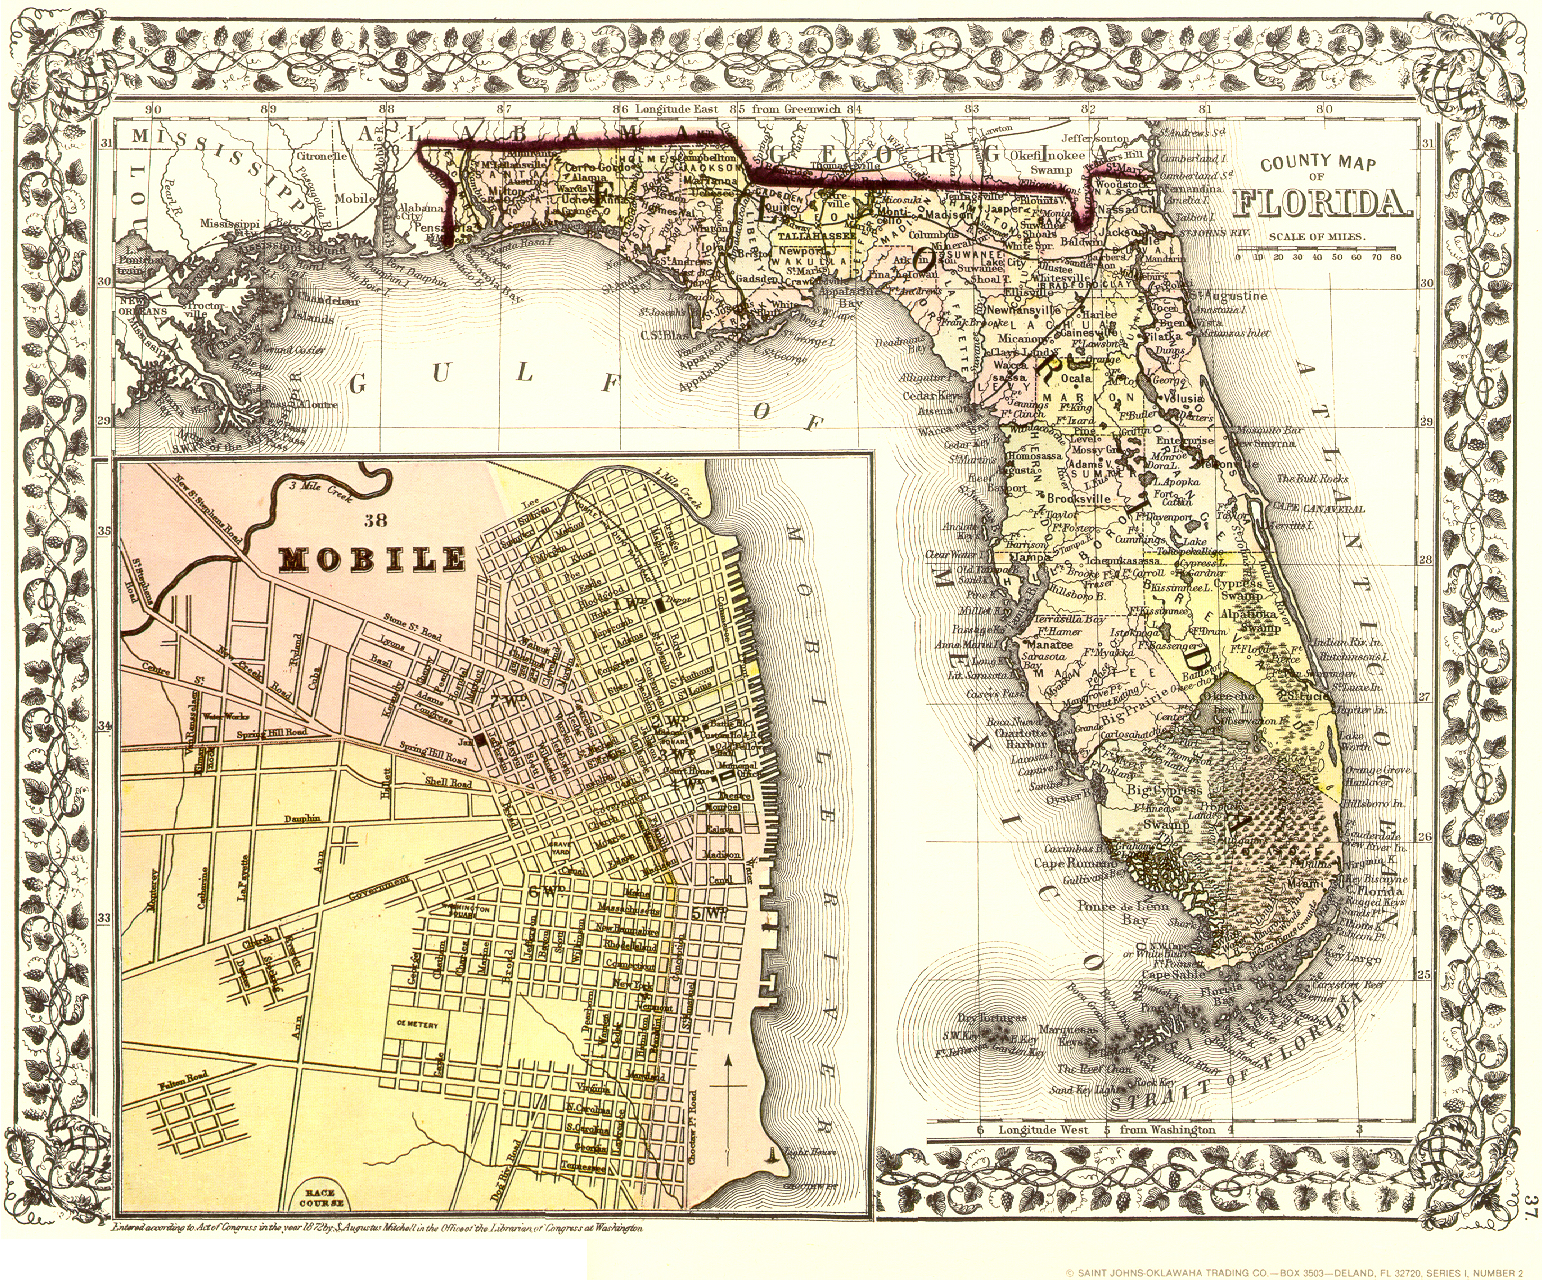 Map courtesy of University of Florida Map Library